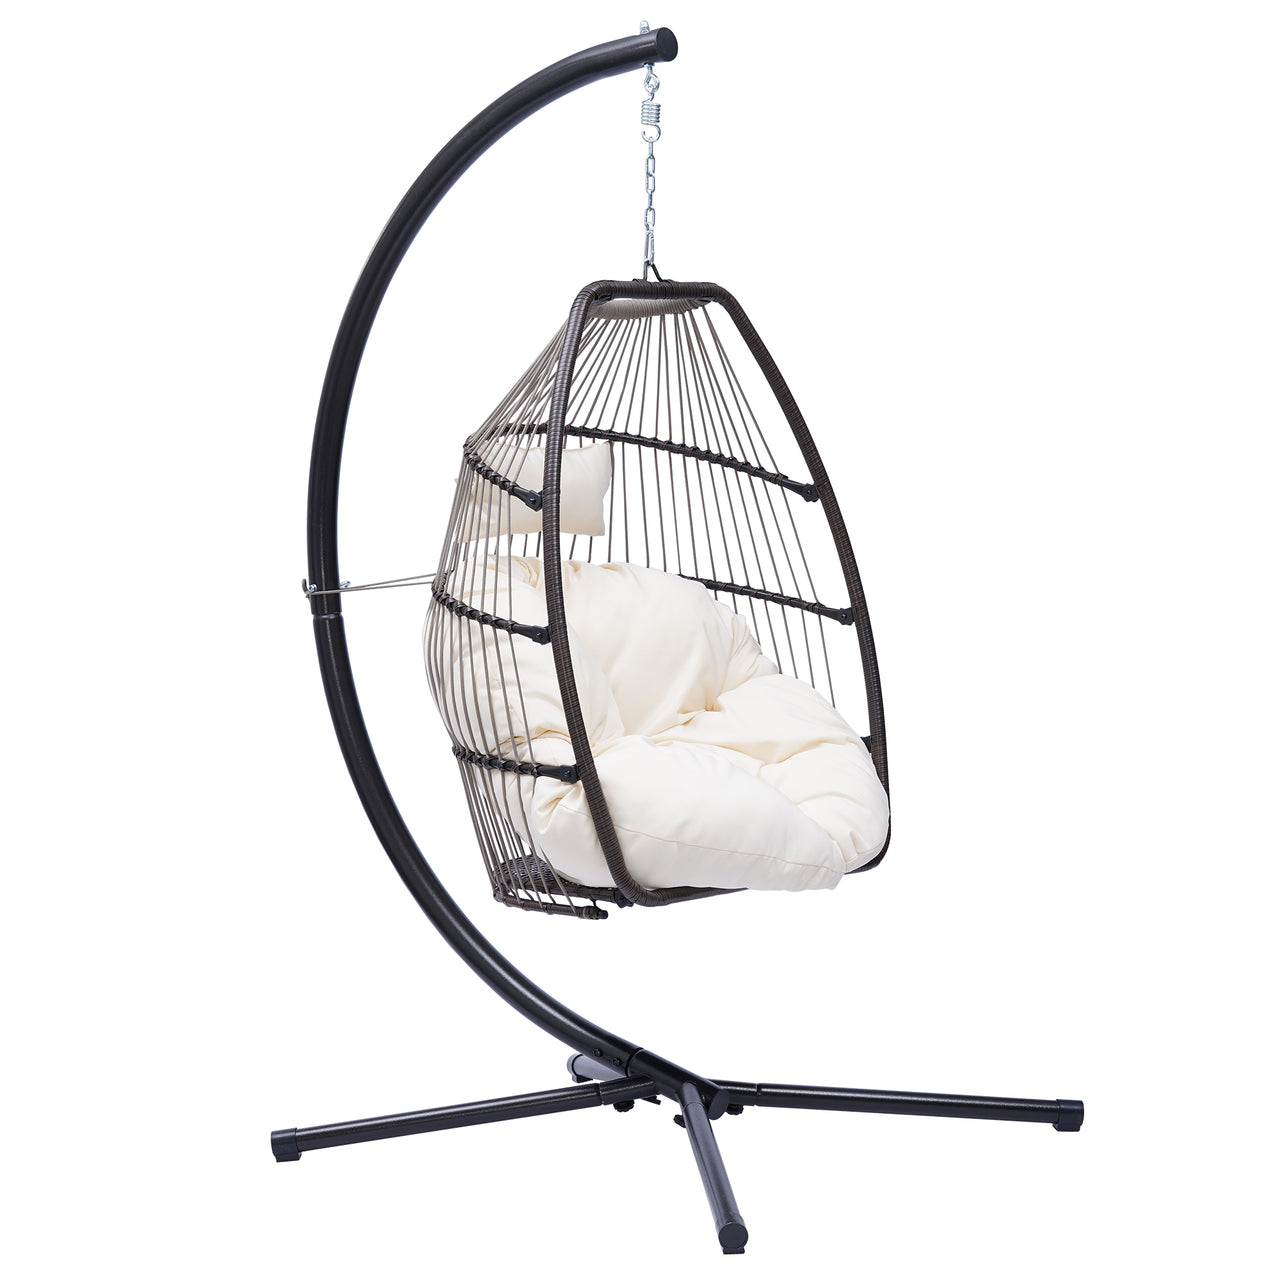 Outdoor Patio Wicker folding Hanging Chair,Rattan Swing Hammock Egg Chair with C Type bracket , with cushion and pillow,Beige